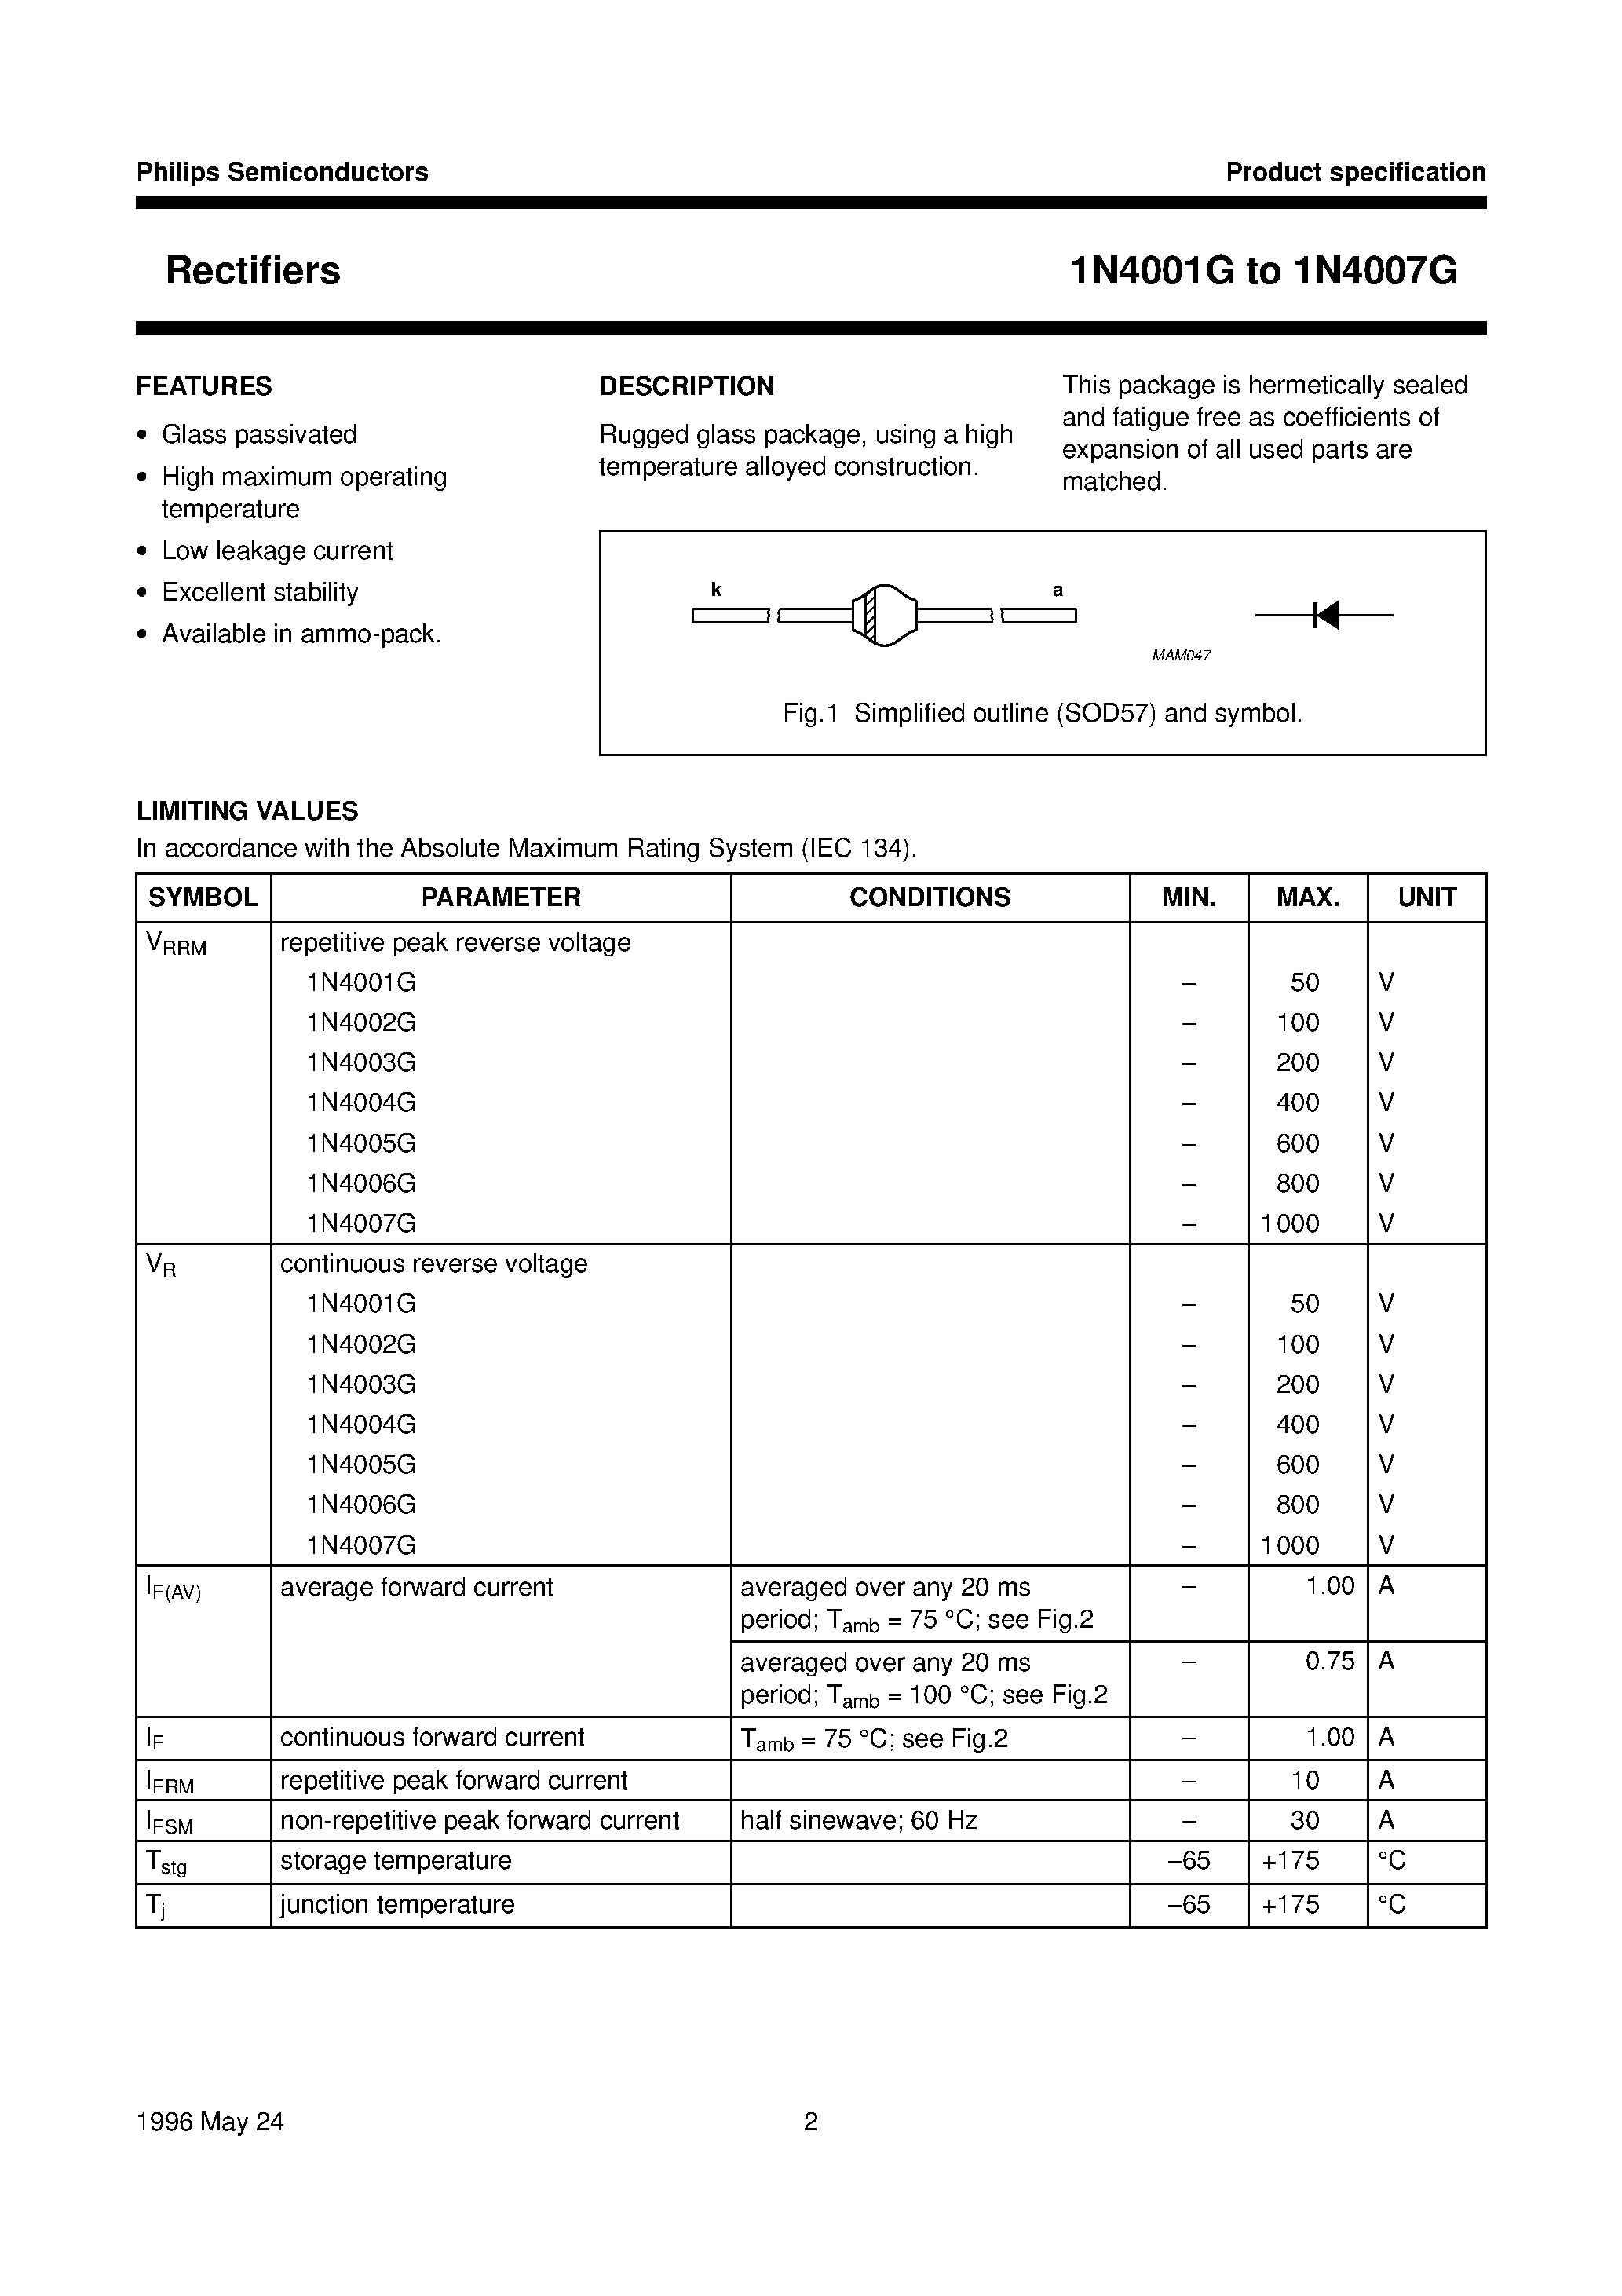 Datasheet 1N4001G - (1N4001G - 1N4007G) Rectifiers(Rugged glass package / using a high temperature alloyed construction) page 2